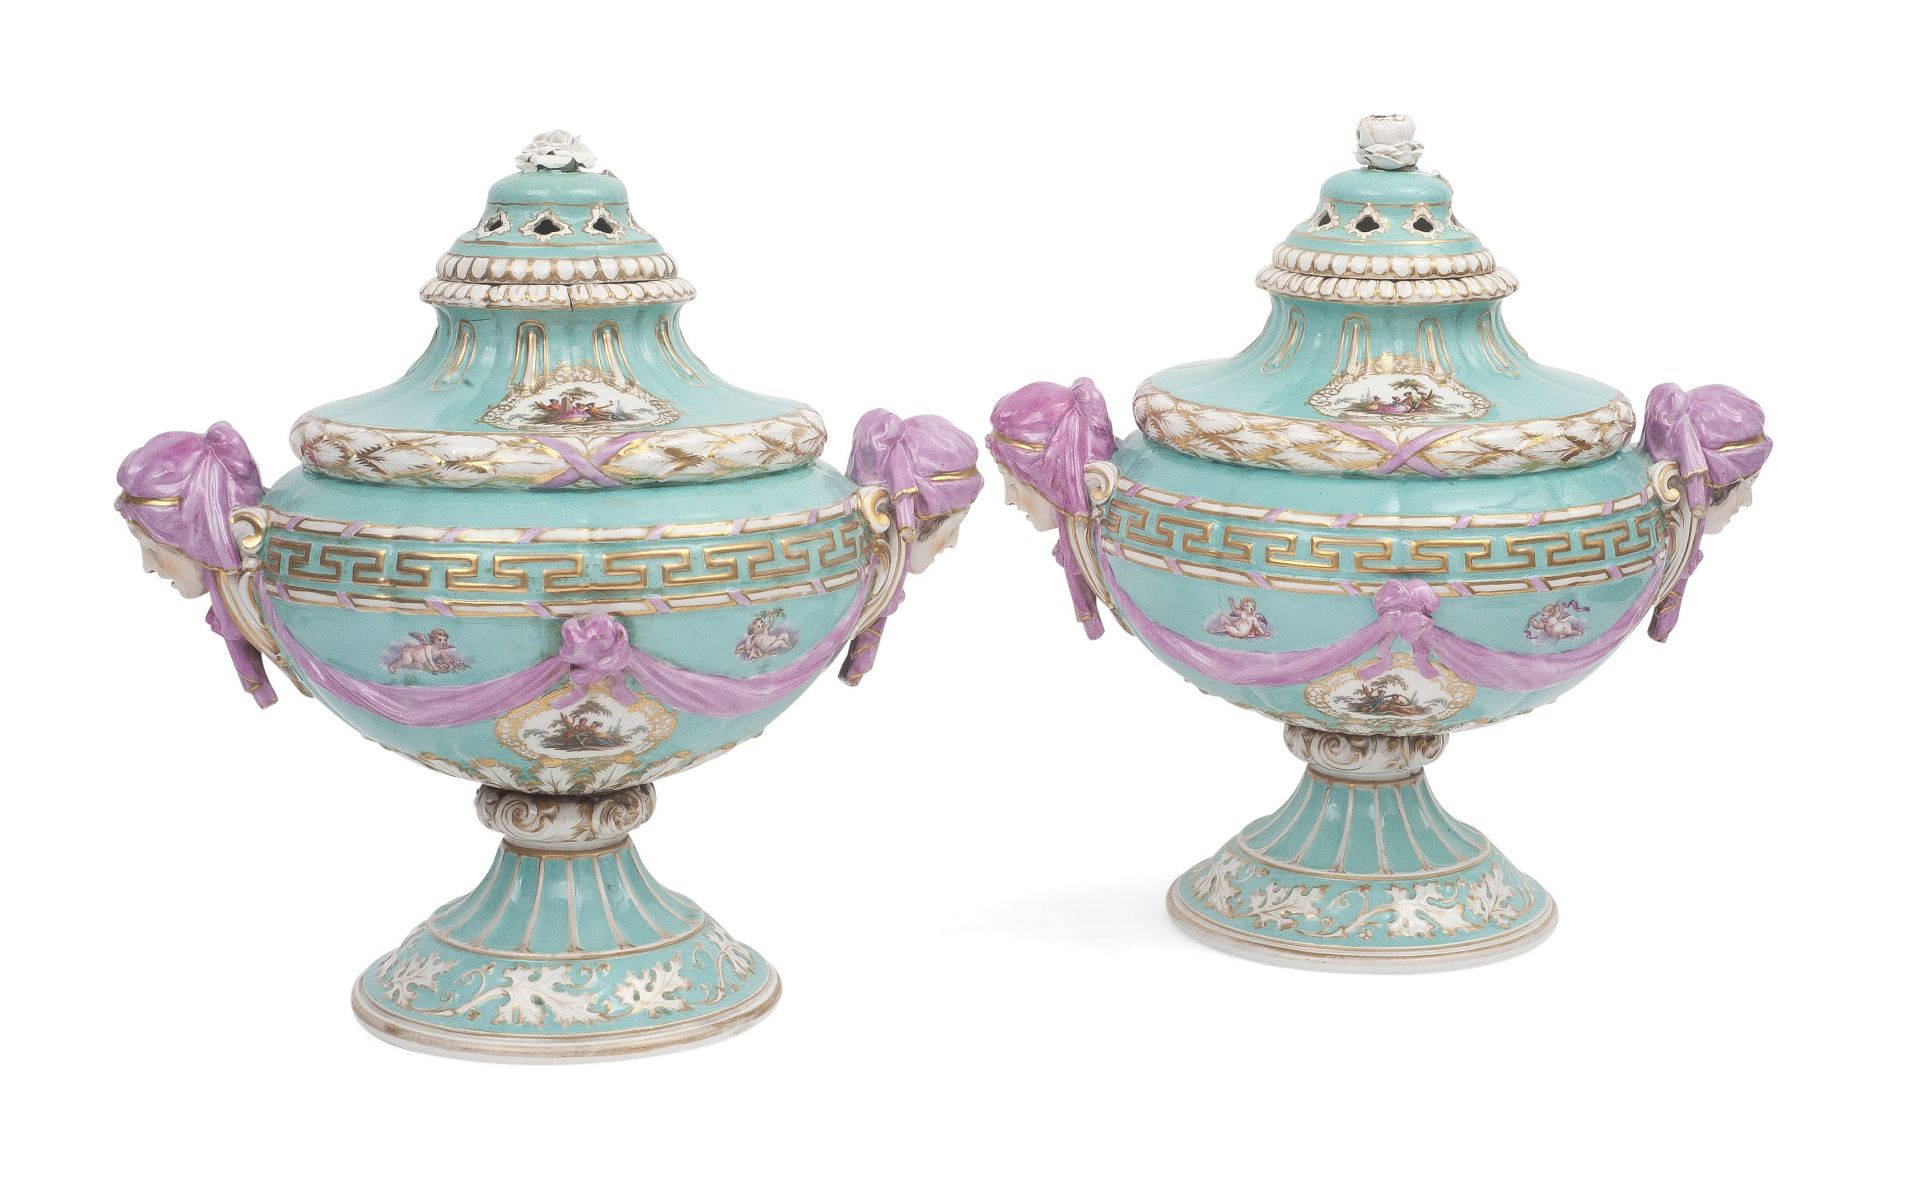 A PAIR OF LATE 19TH CENTURY BERLIN PORCELAIN VASES AND COVERS